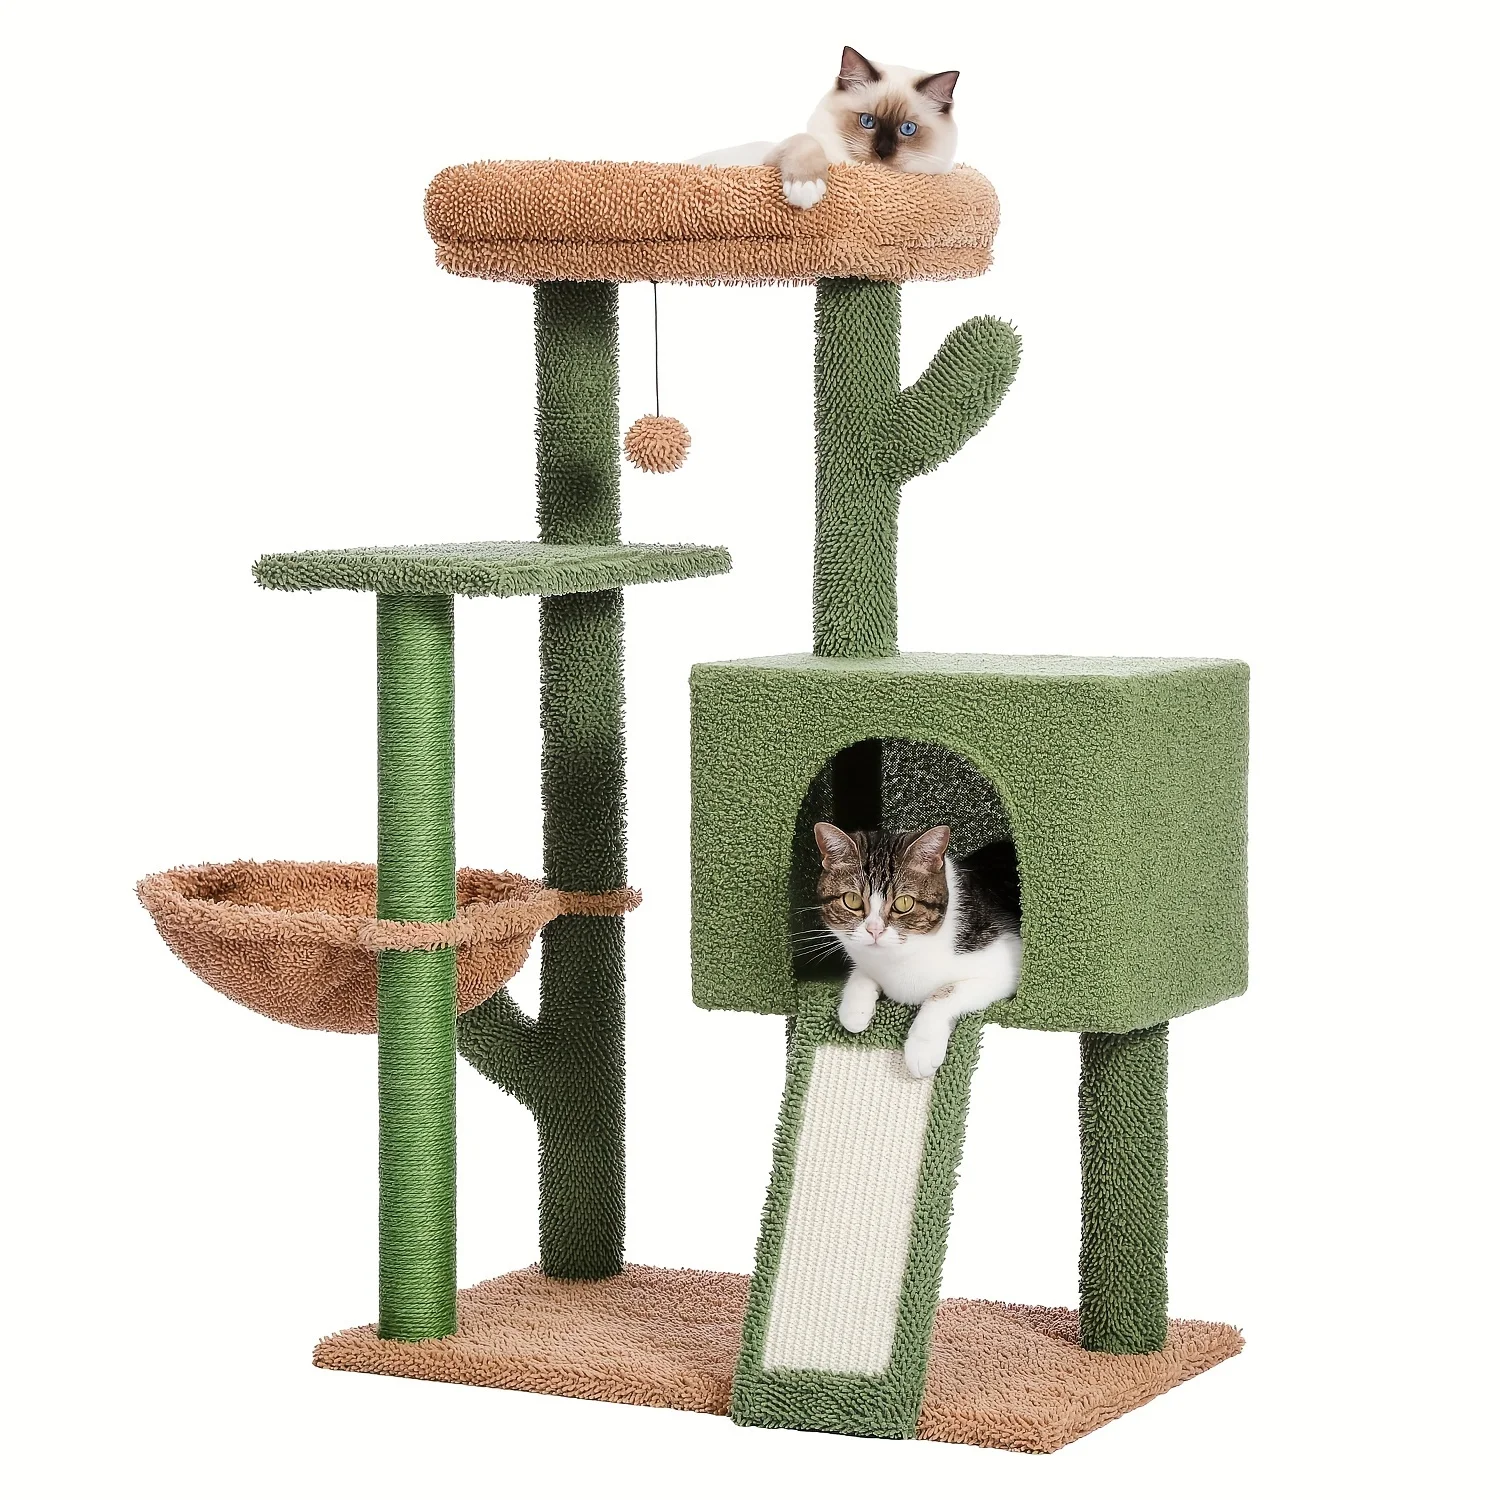 

41 Inches Cactus Cat Tower, Featuring A Sisal Covered Scratching Post And A Cozy Condo For Indoor Cats, Serving As A Cat Climbin